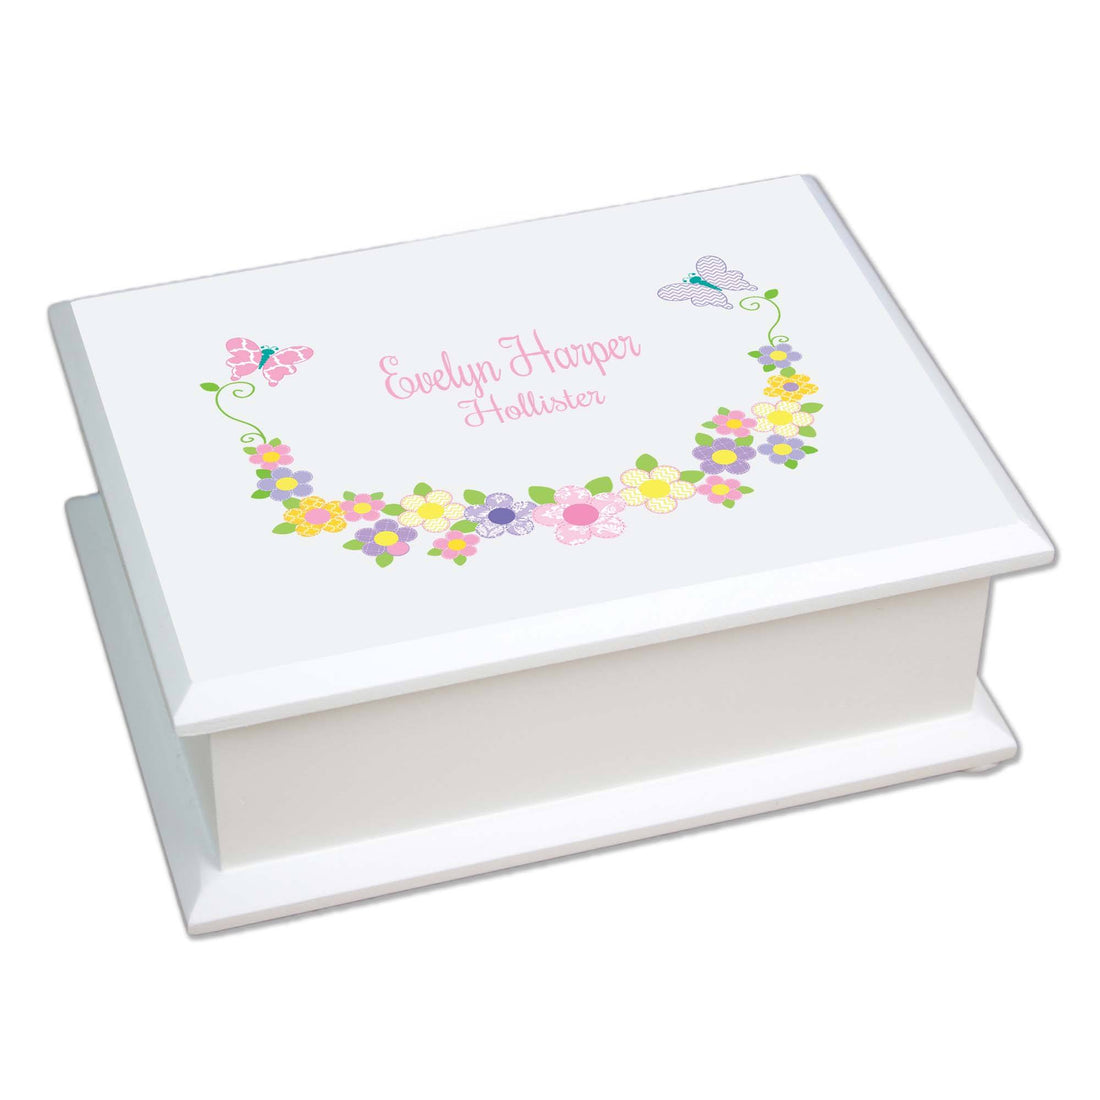 Personalized Lift Top Jewelry Box with Pastel Butterflies design